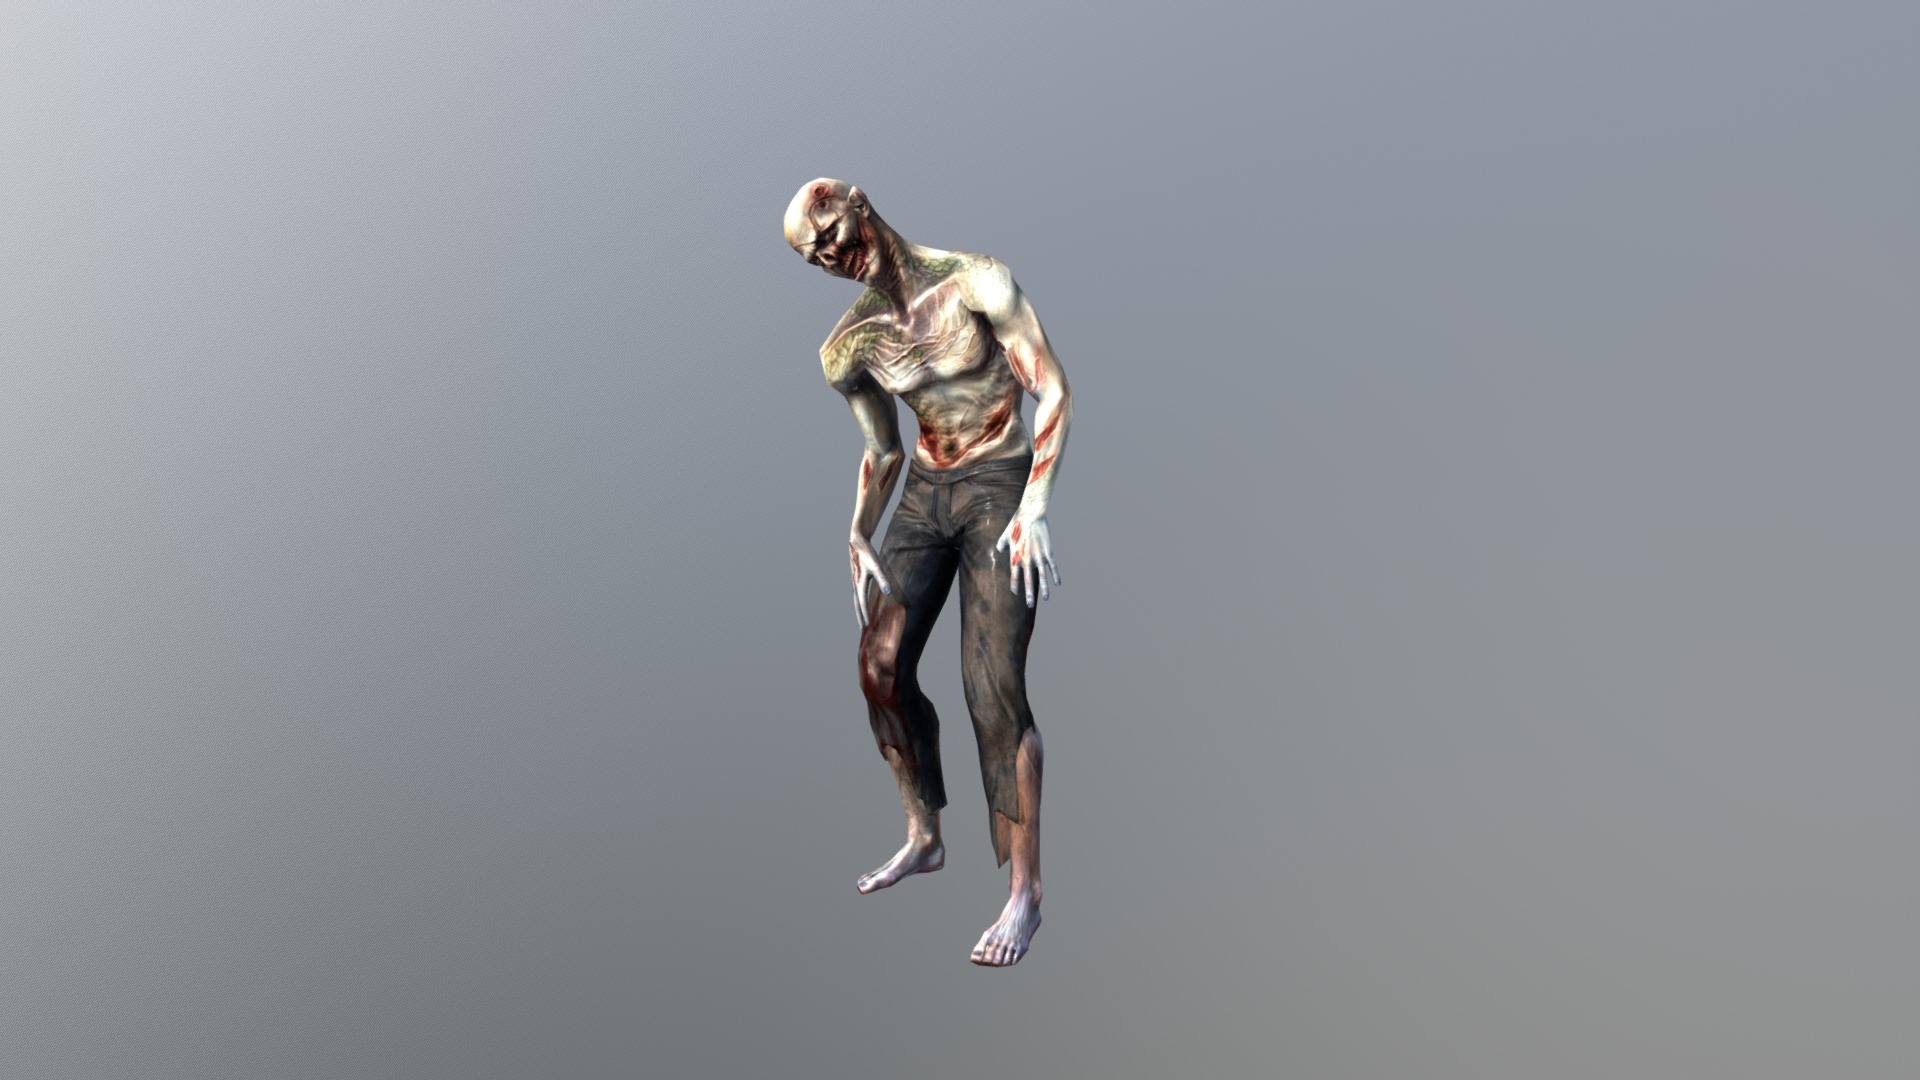 Model of a zombie enemy for game Best Sniper made for T-bull SA

model &amp; placeholder animation by: me

textures by Agata Guga-Gut/Robert Myśliwski

Developer:
T-Bull SA
http://t-bull.com/

Game:
Best Sniper: Shooting Hunter 3D
https://play.google.com/store/apps/details?id=com.tbegames.and.best_sniper_shooter - Low poly Zombie model - 3D model by Piotr Świerczyński (@Domperignome) 3d model